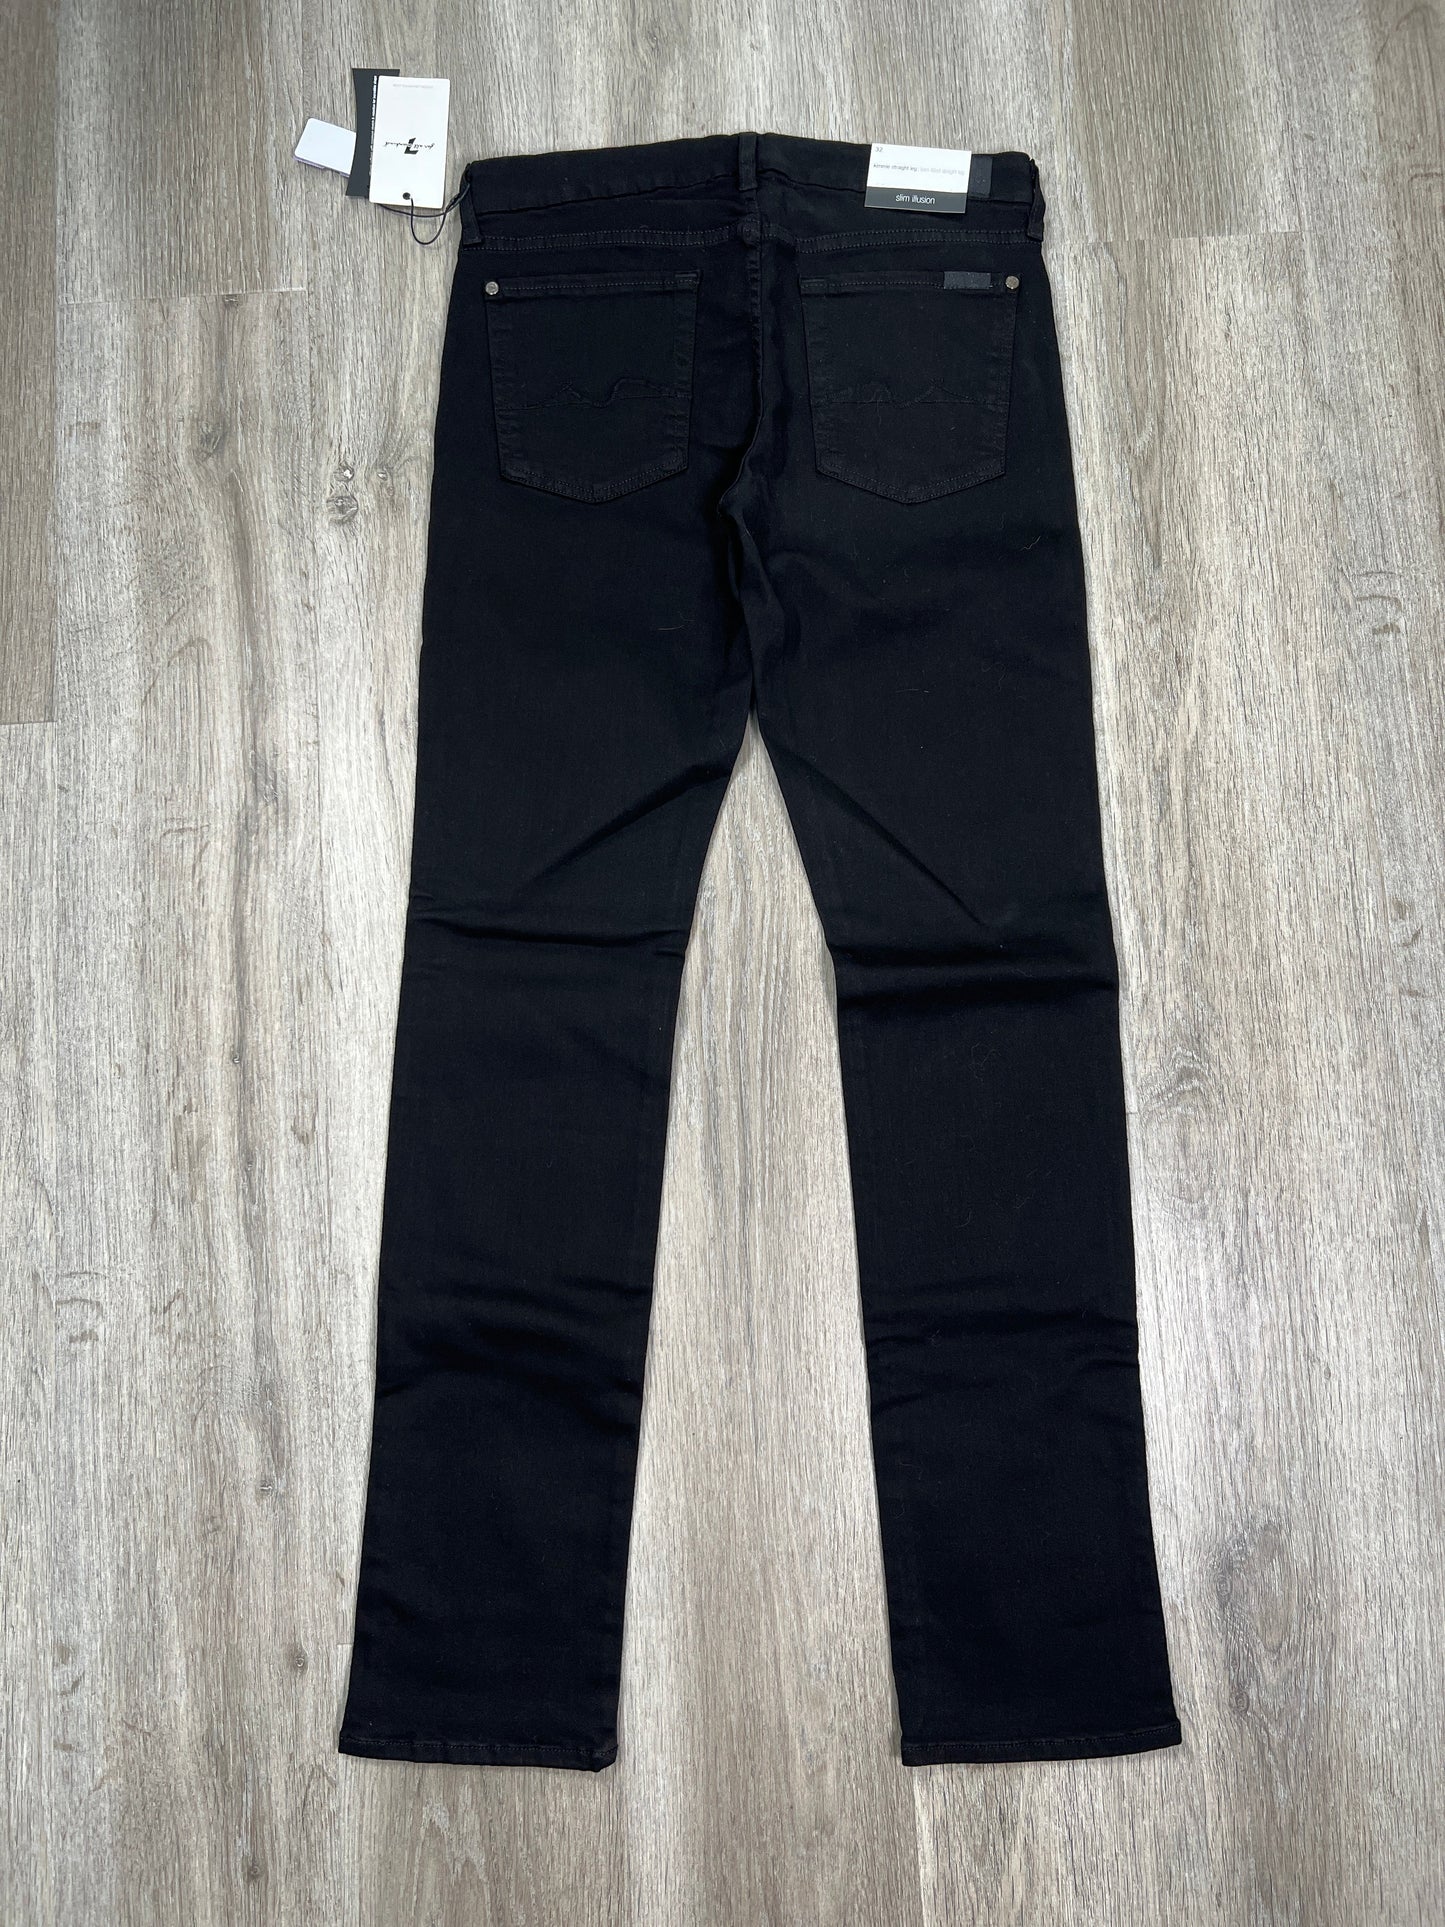 Black Denim Jeans Straight 7 For All Mankind, Size 14